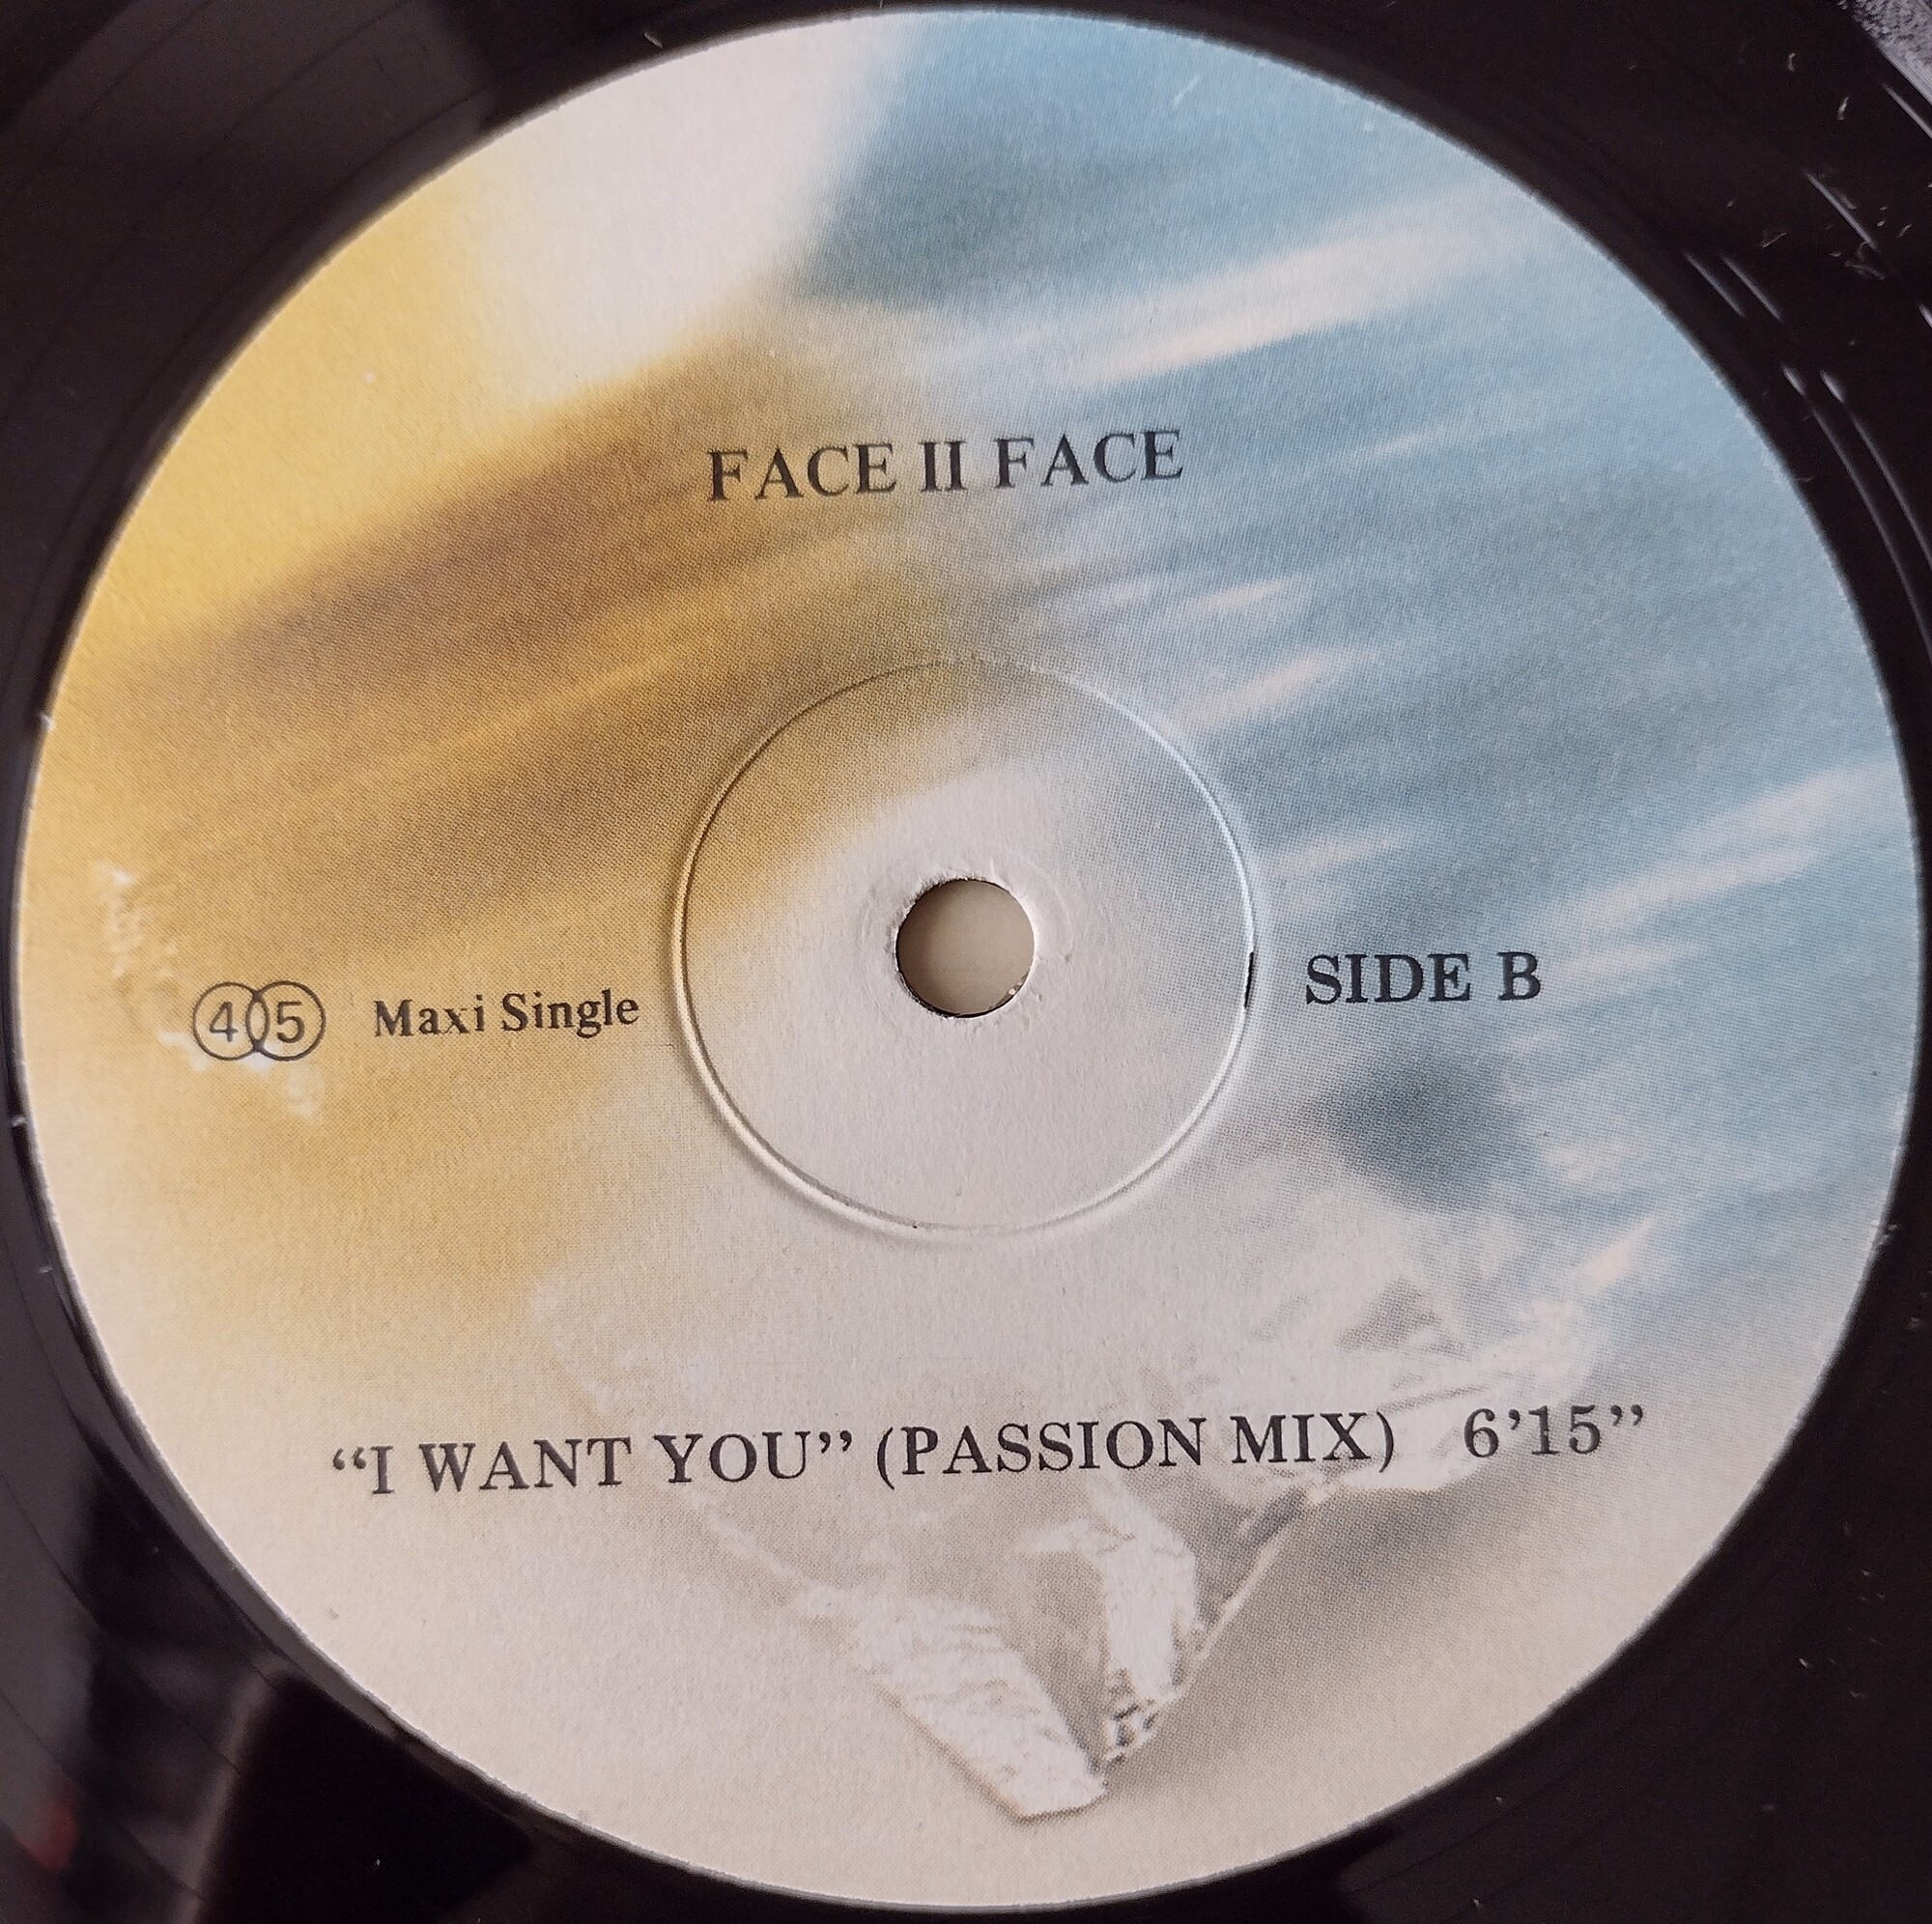 Love 4 Sale — Do You Feel So Right /  Face II Face— I Want You